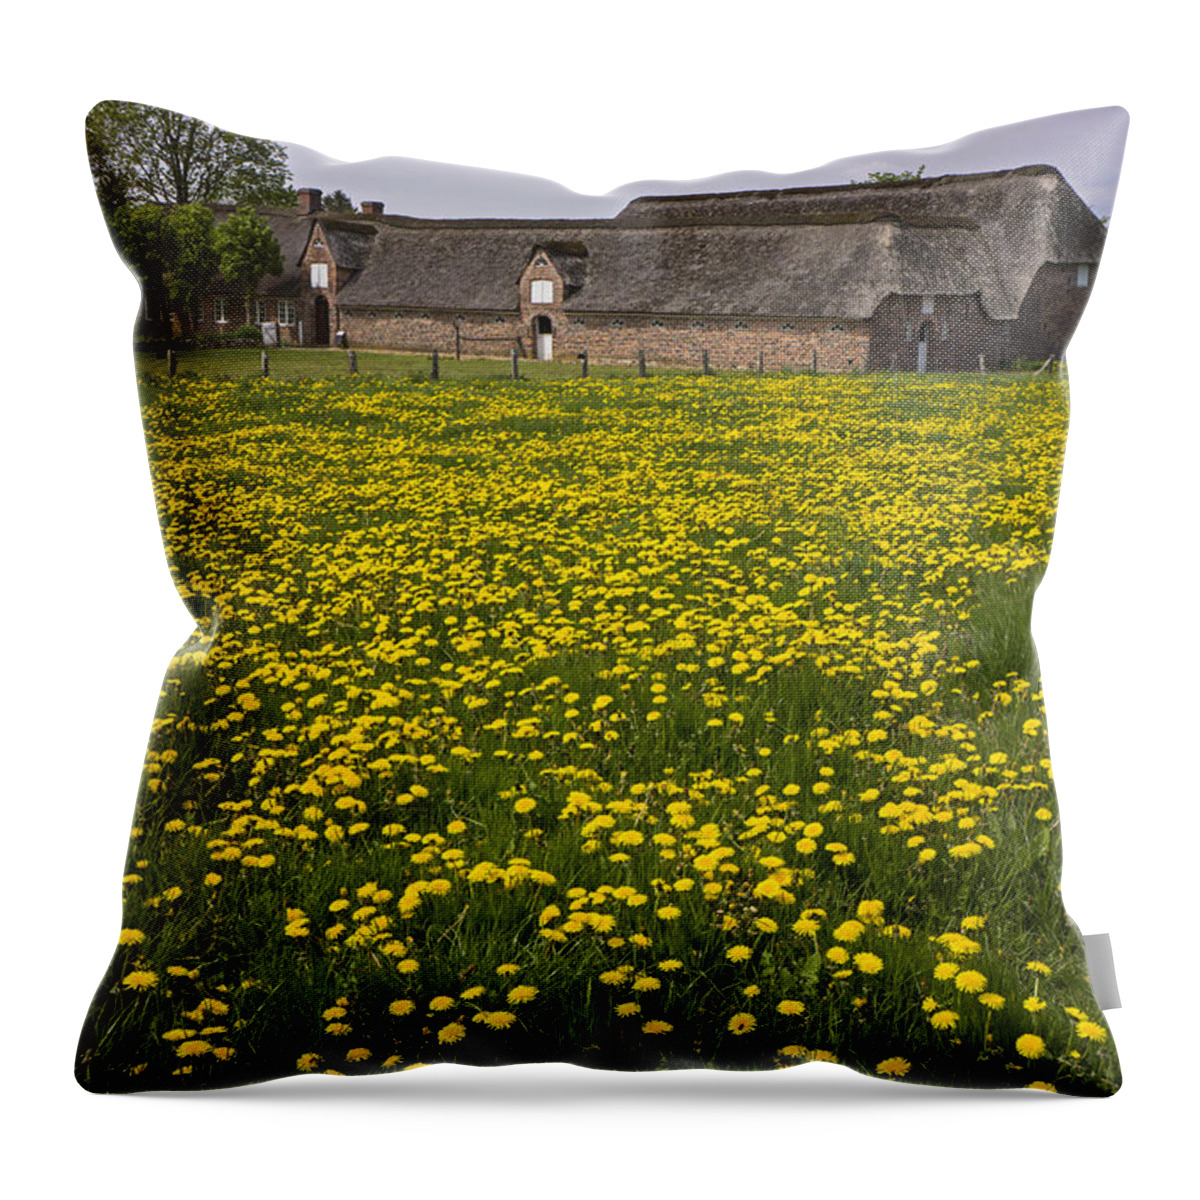 Dandelion Throw Pillow featuring the photograph Dandelion Field by Inge Riis McDonald